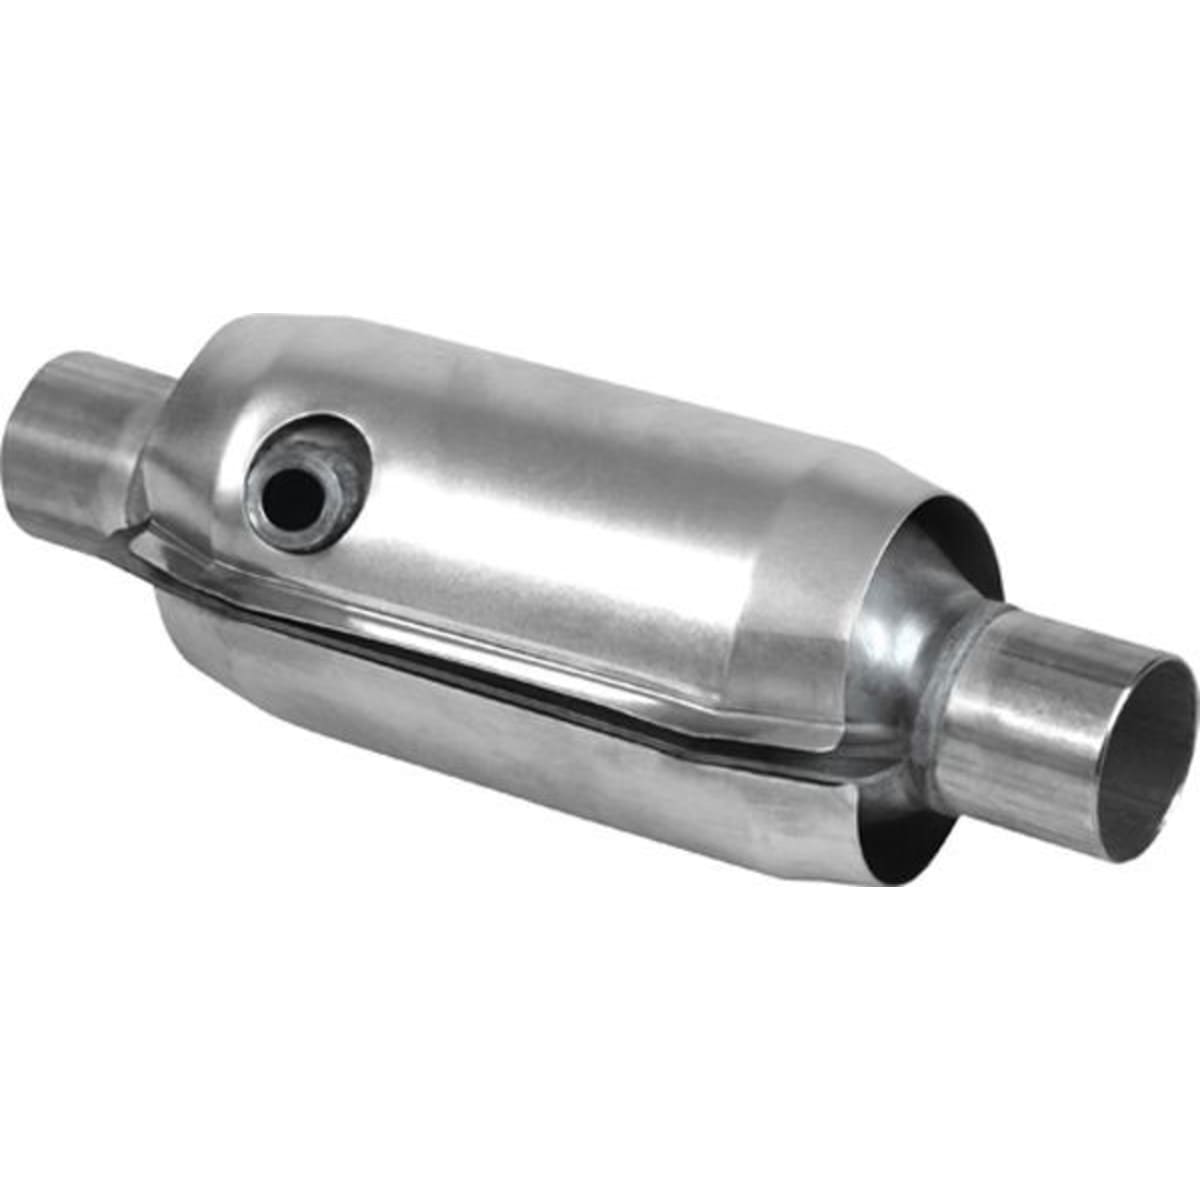 Eastern® 82724 Catalytic Converter - 46-State Legal (Cannot ship to CA, CO, NY or ME)